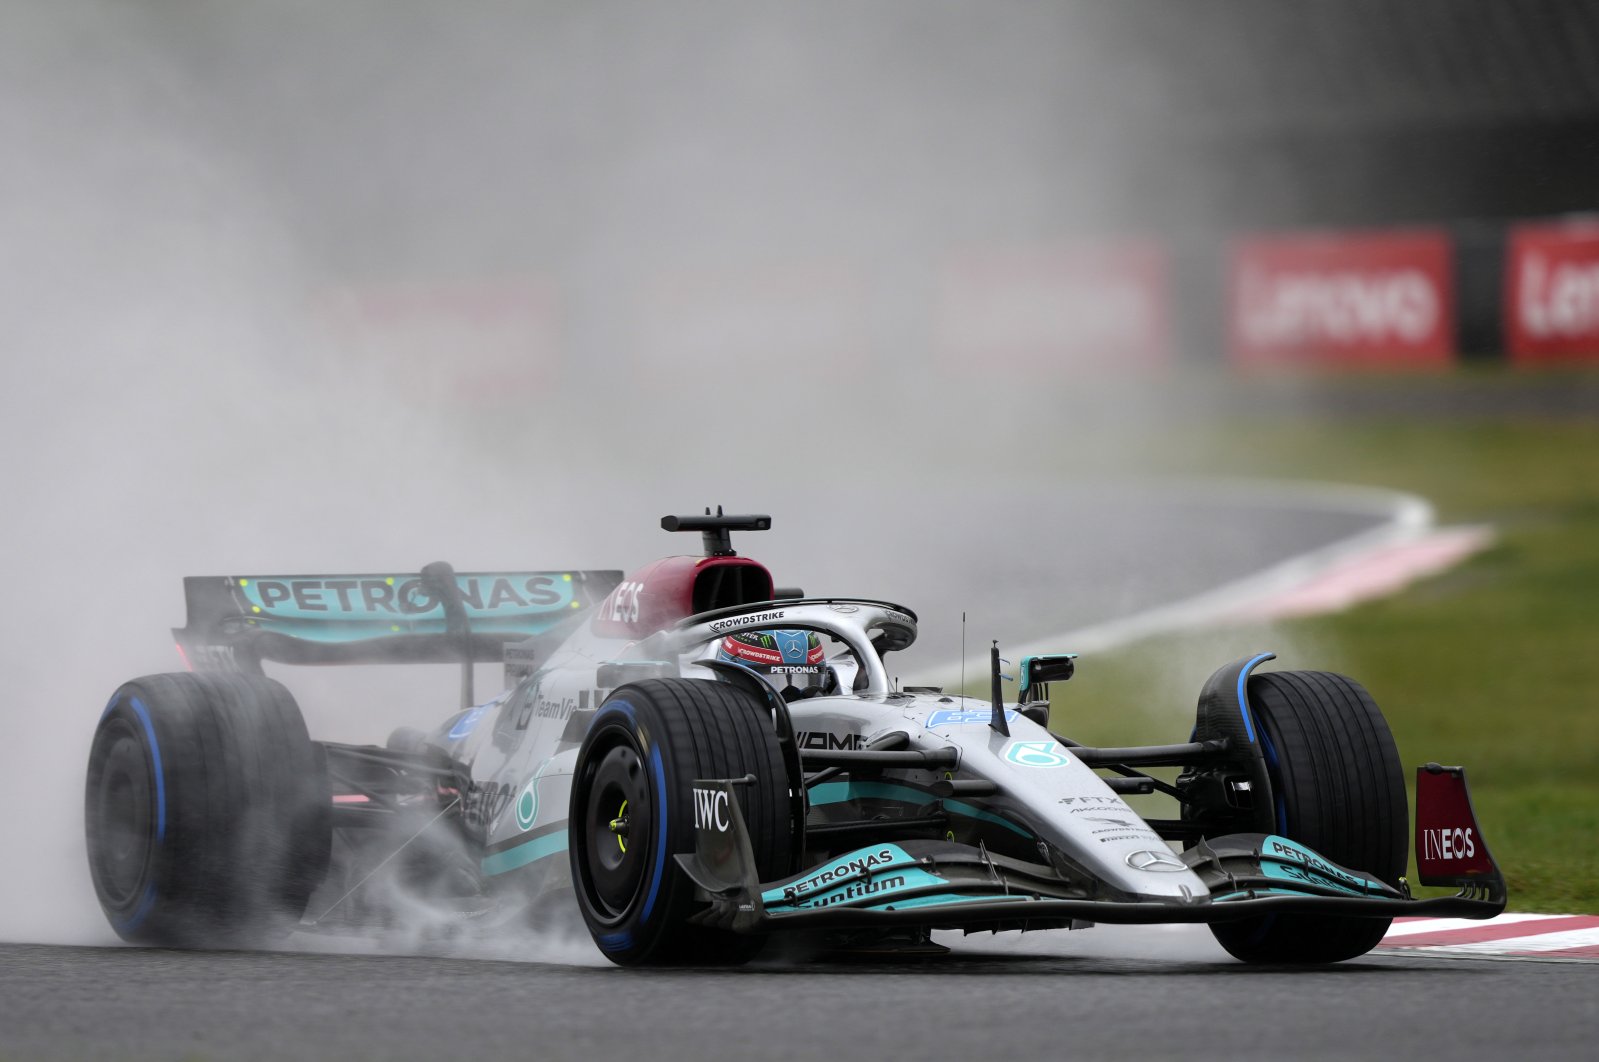 British Formula One driver George Russell of Mercedes-AMG Petronas steers his car during the second practice session of the Japanese Formula One Grand Prix, Suzuka, Japan, Oct. 7, 2022. (EPA Photo)